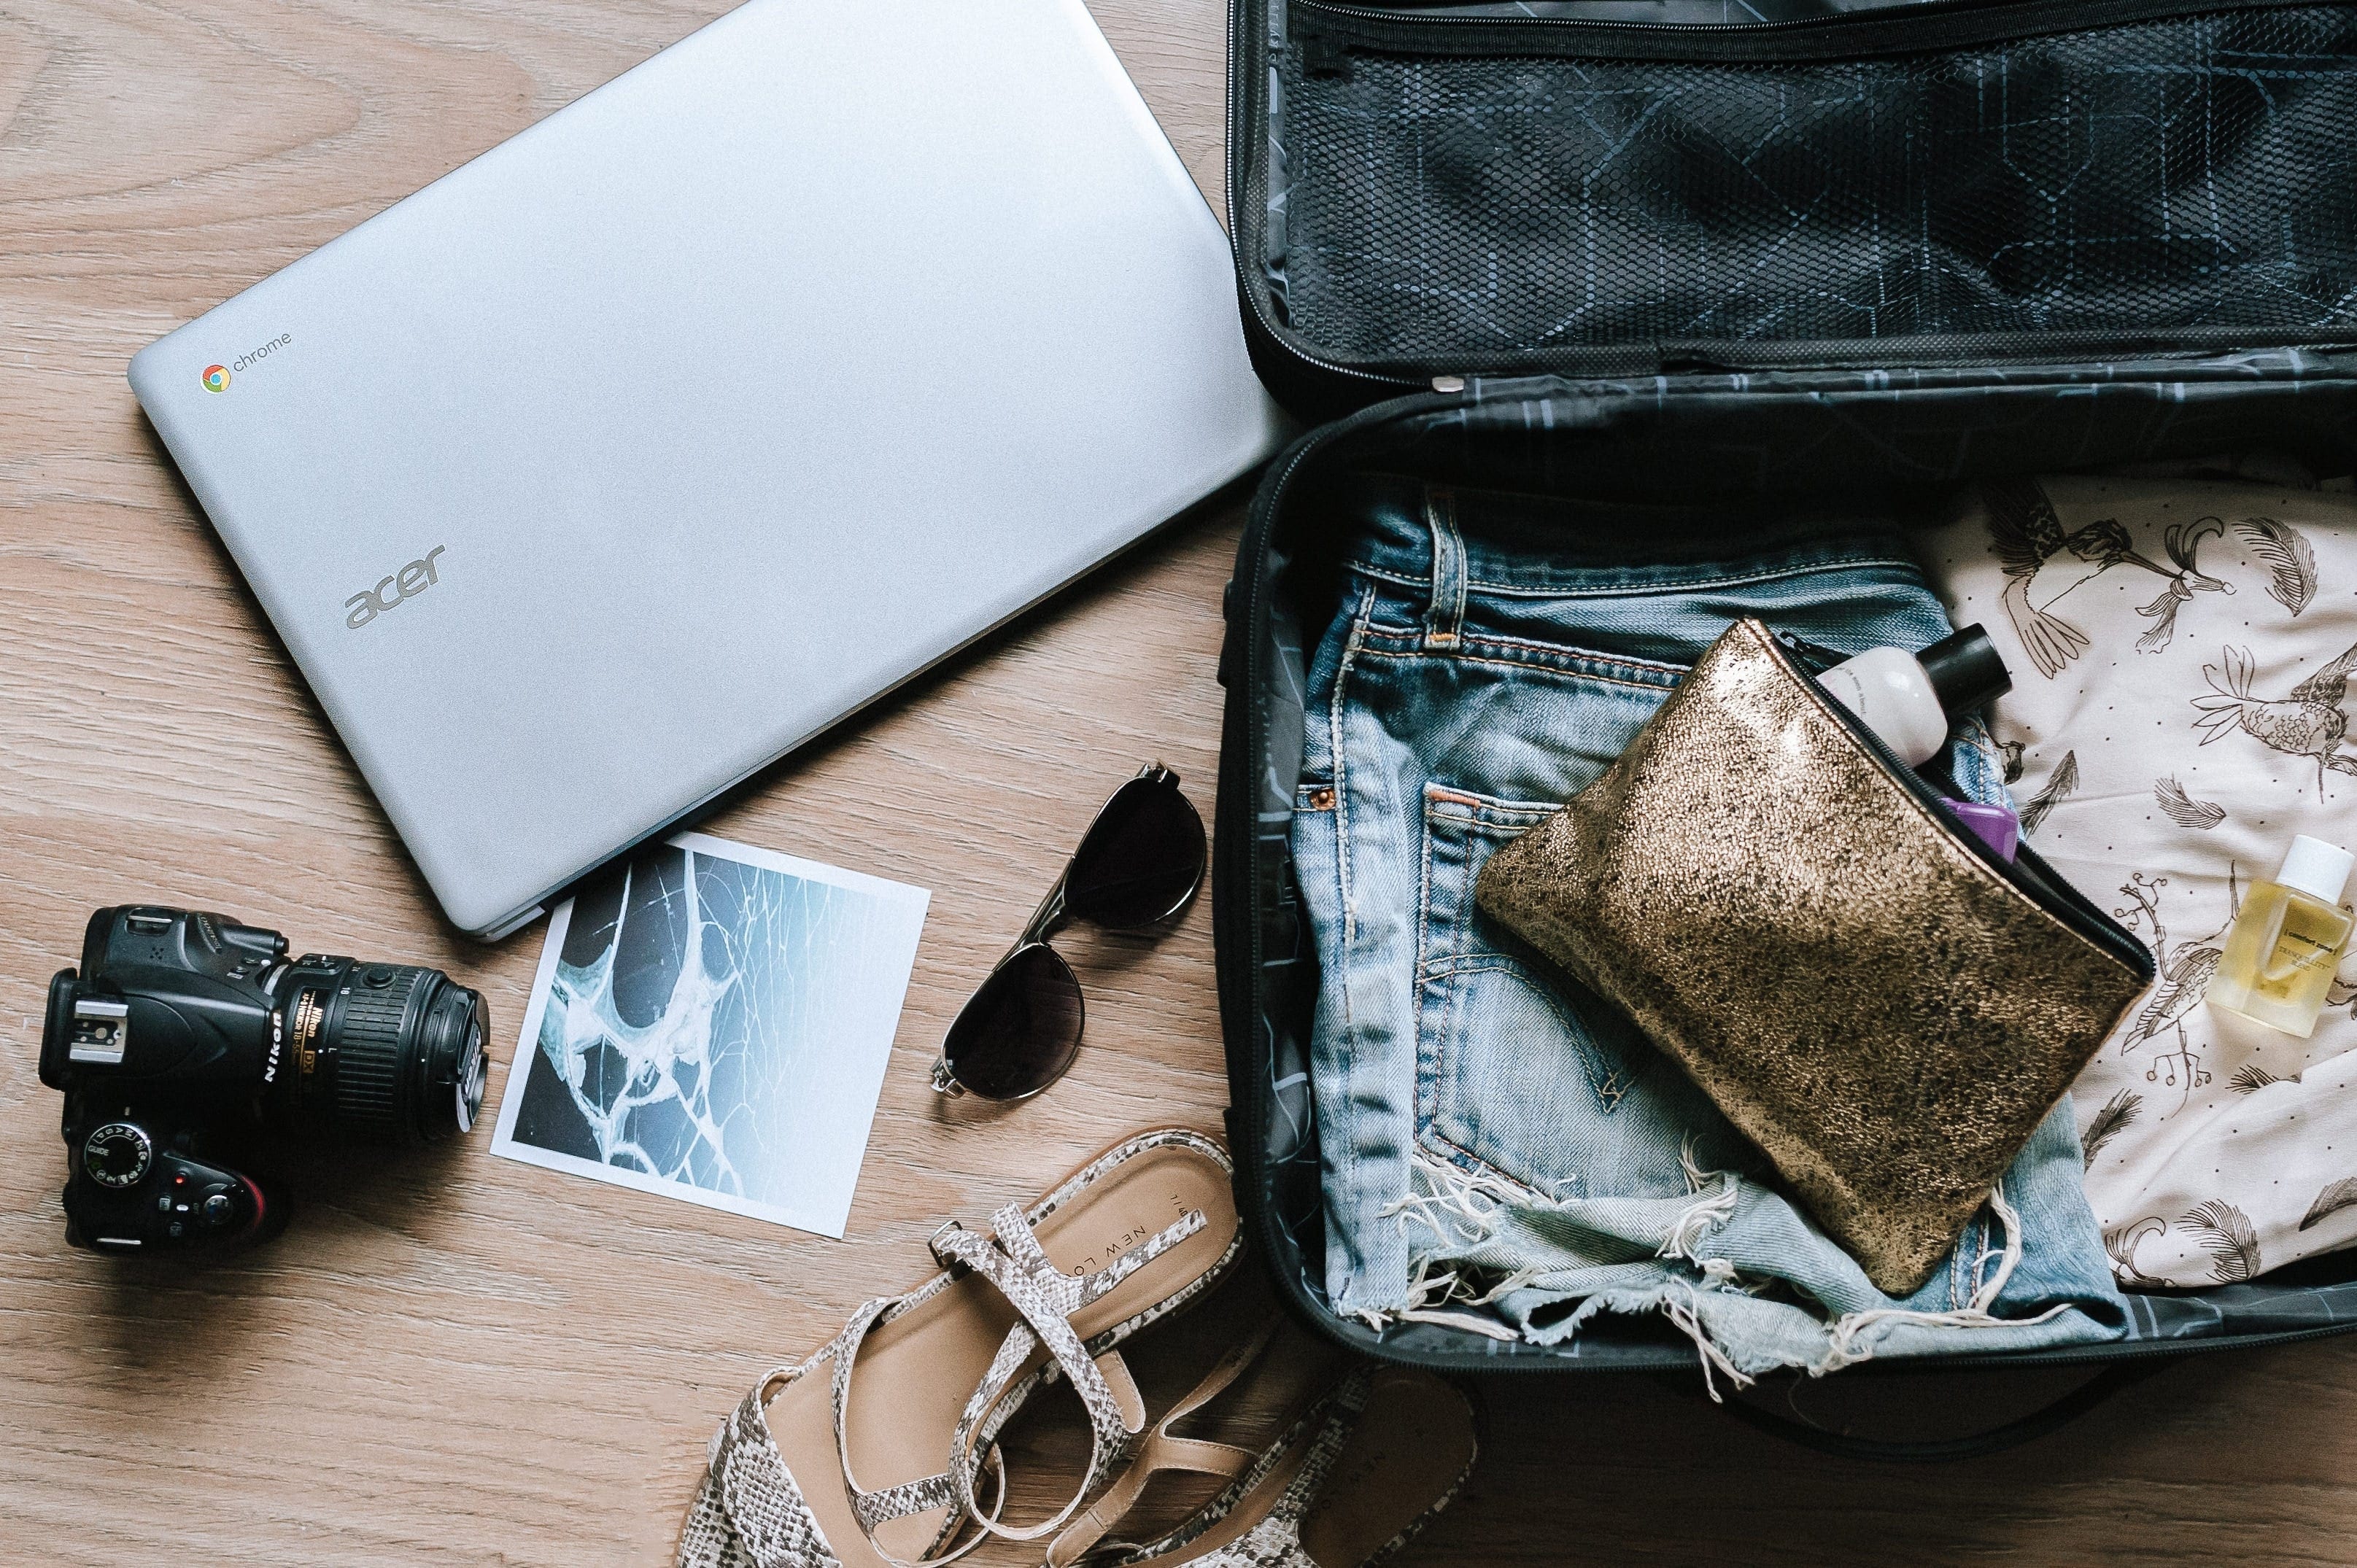 anete-lusina-609856-unsplash 5 Essentials To Pack When Travelling Abroad